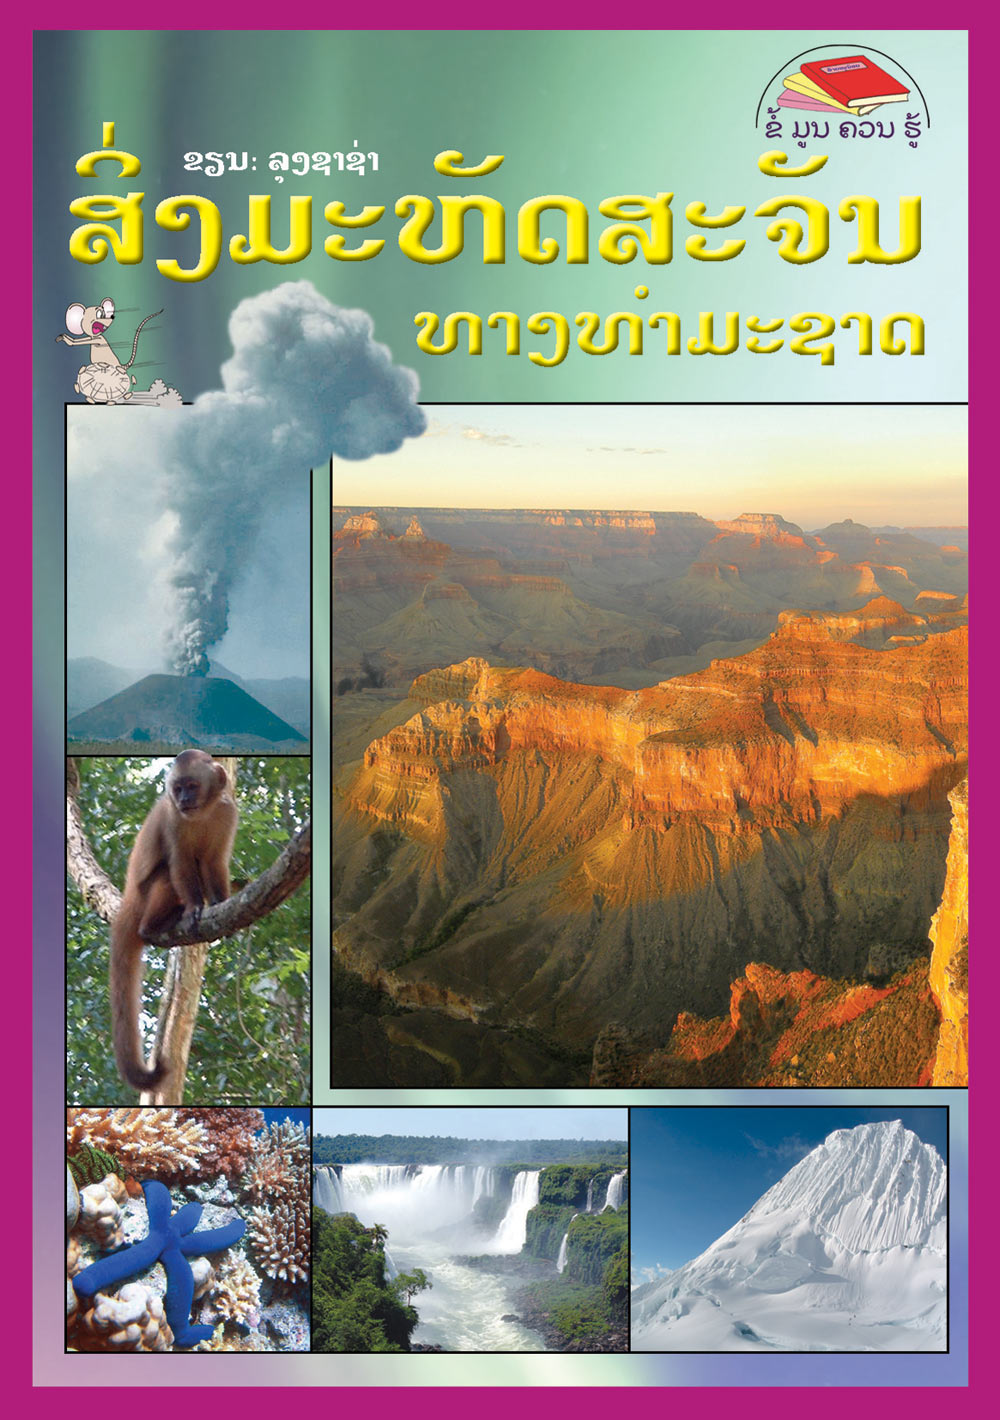 Natural Wonders of the World large book cover, published in Lao language